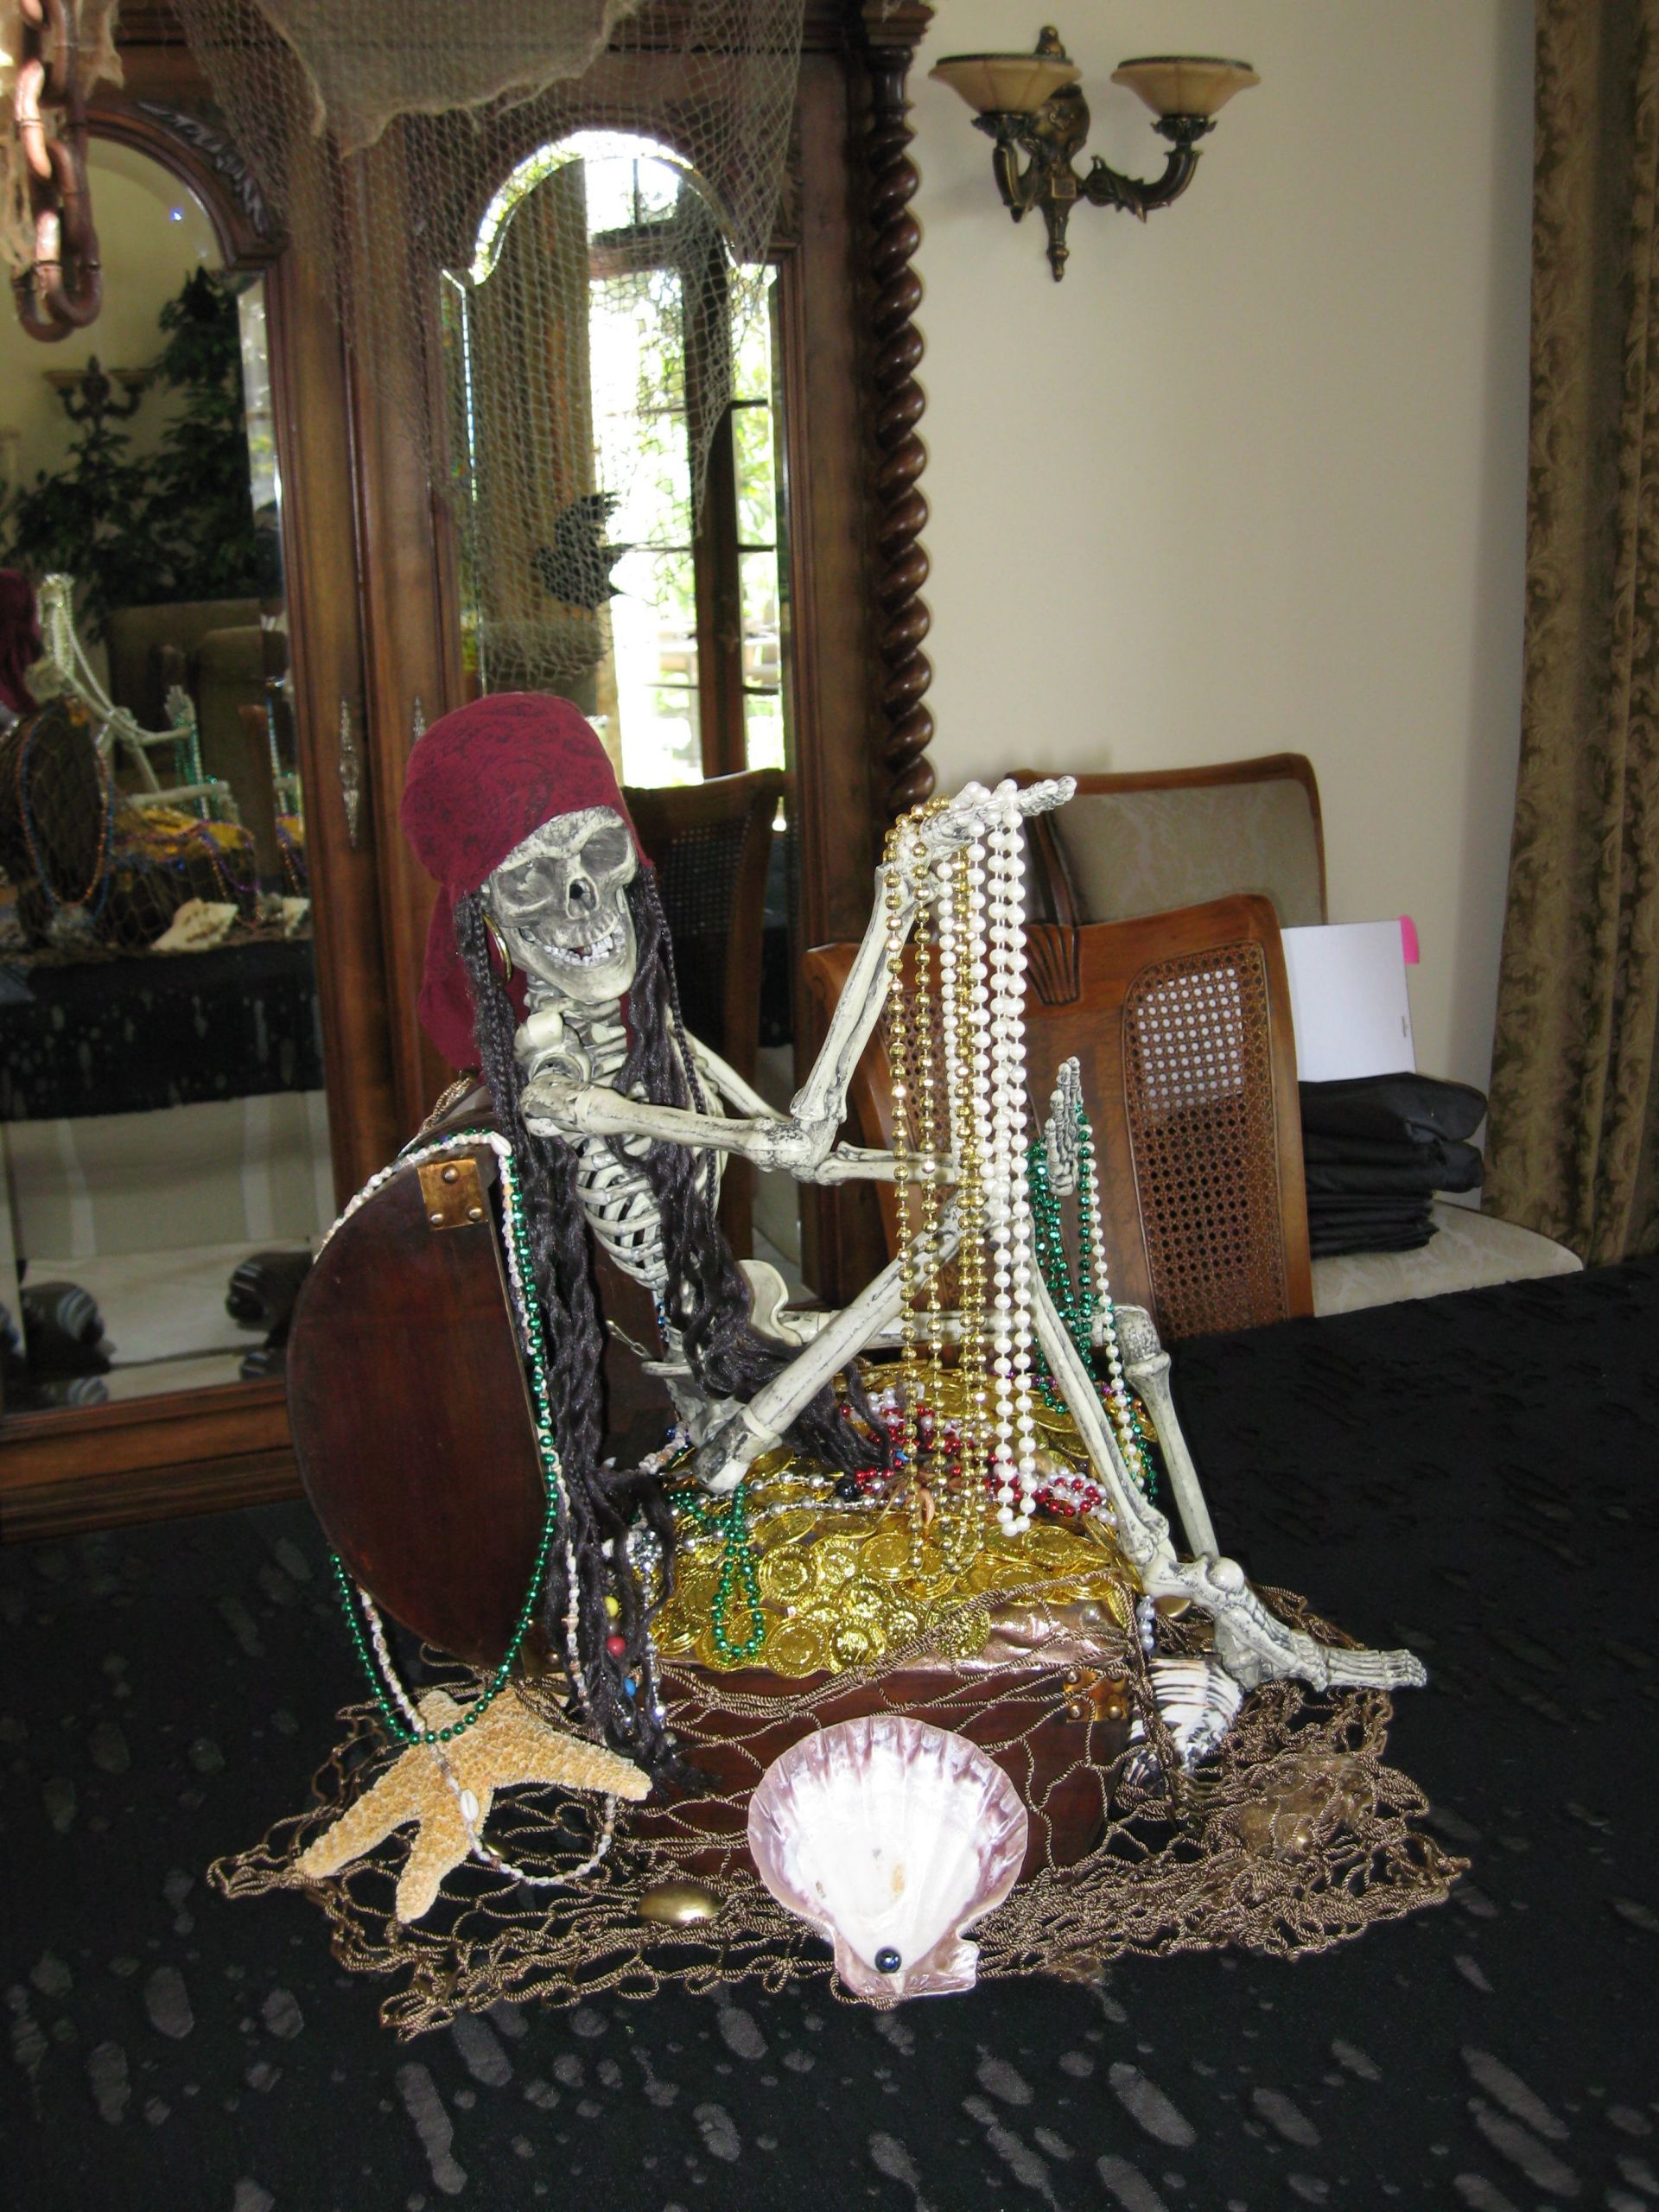 Pirate Halloween Party Ideas
 Pirate Party Decor Centerpiece This might be to